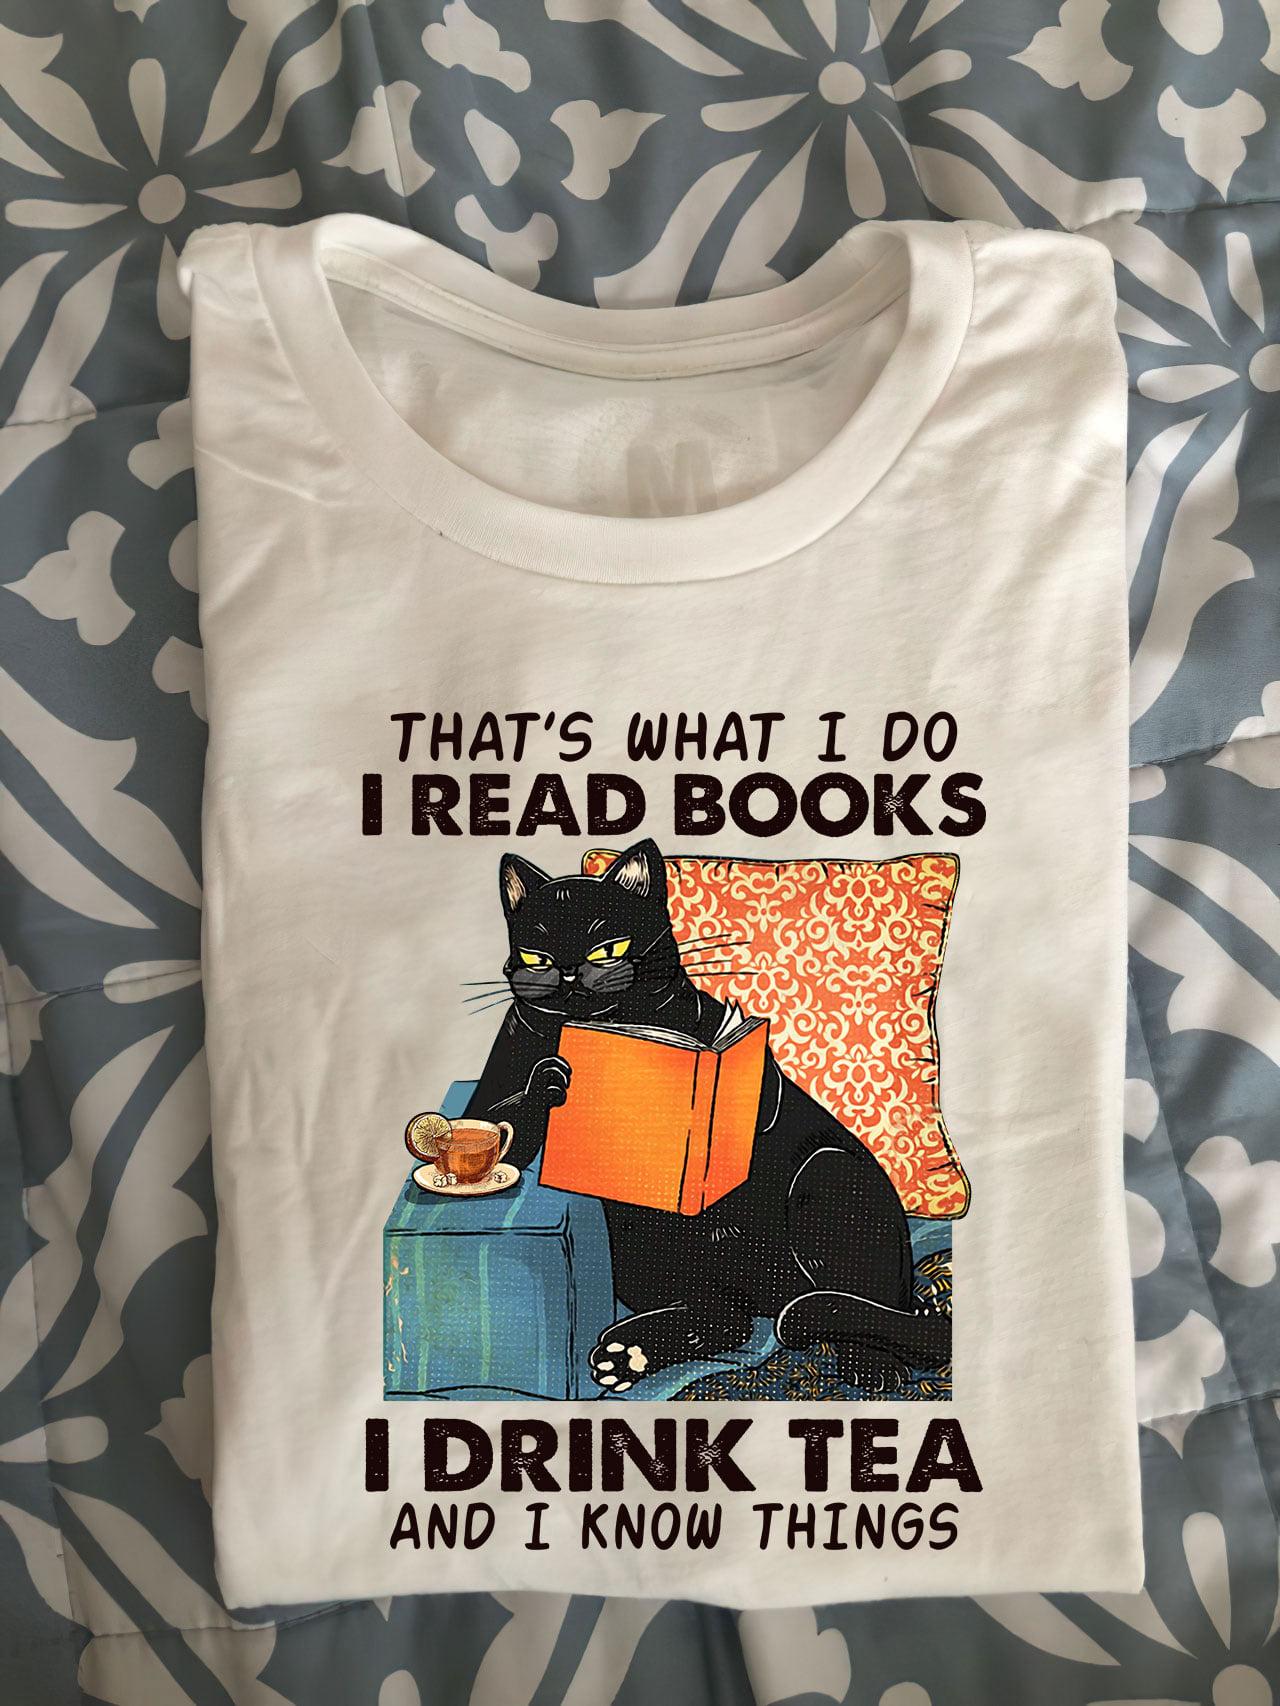 That's what I do I read books I drink tea and I know things - Black cat reading book, book and tea